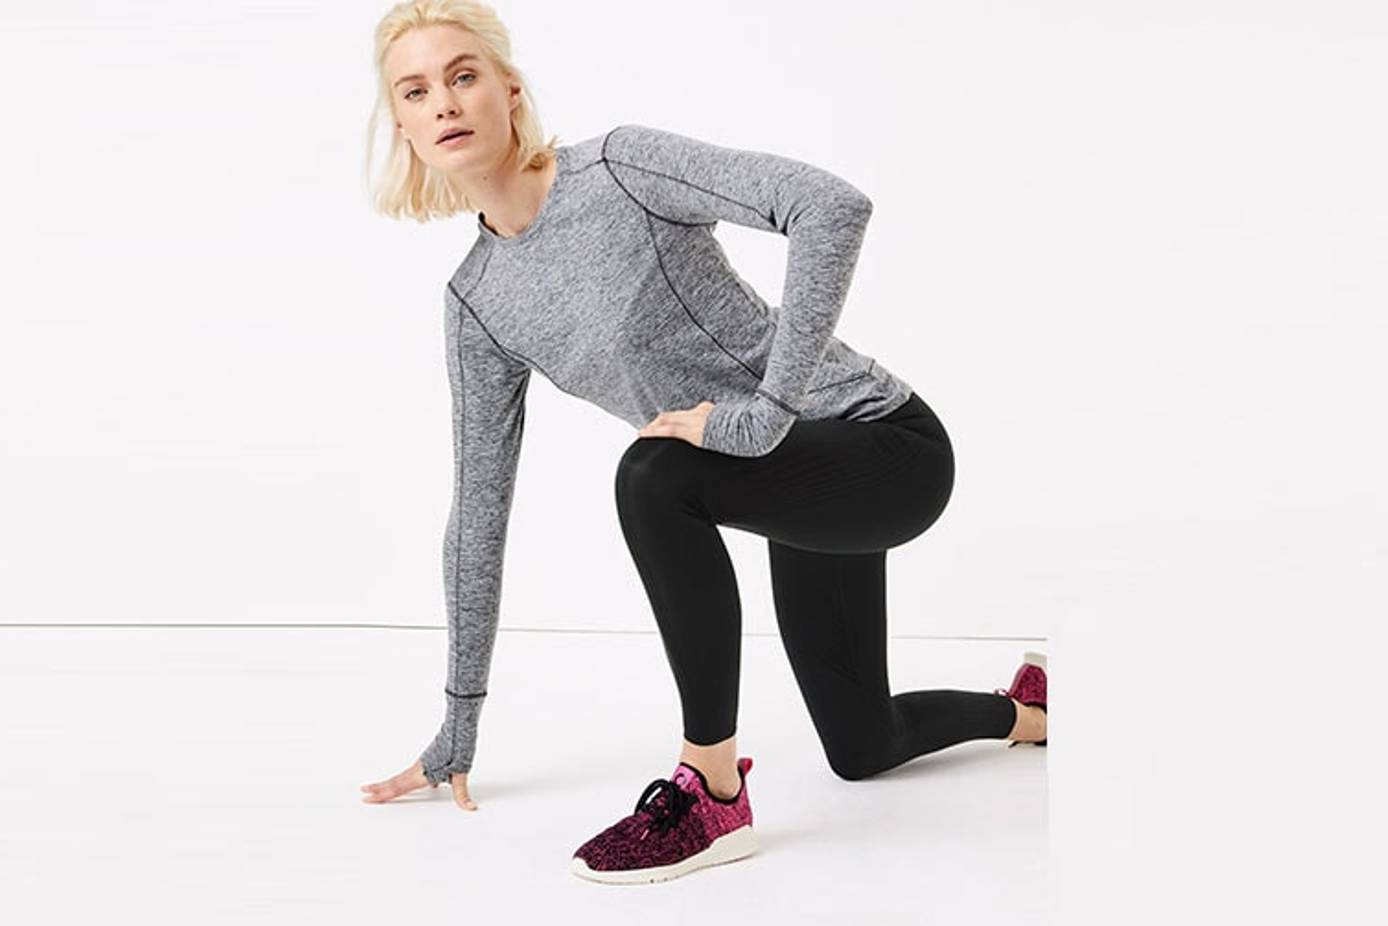 Marks & Spencer drops 'good value' Goodmove fitness collection